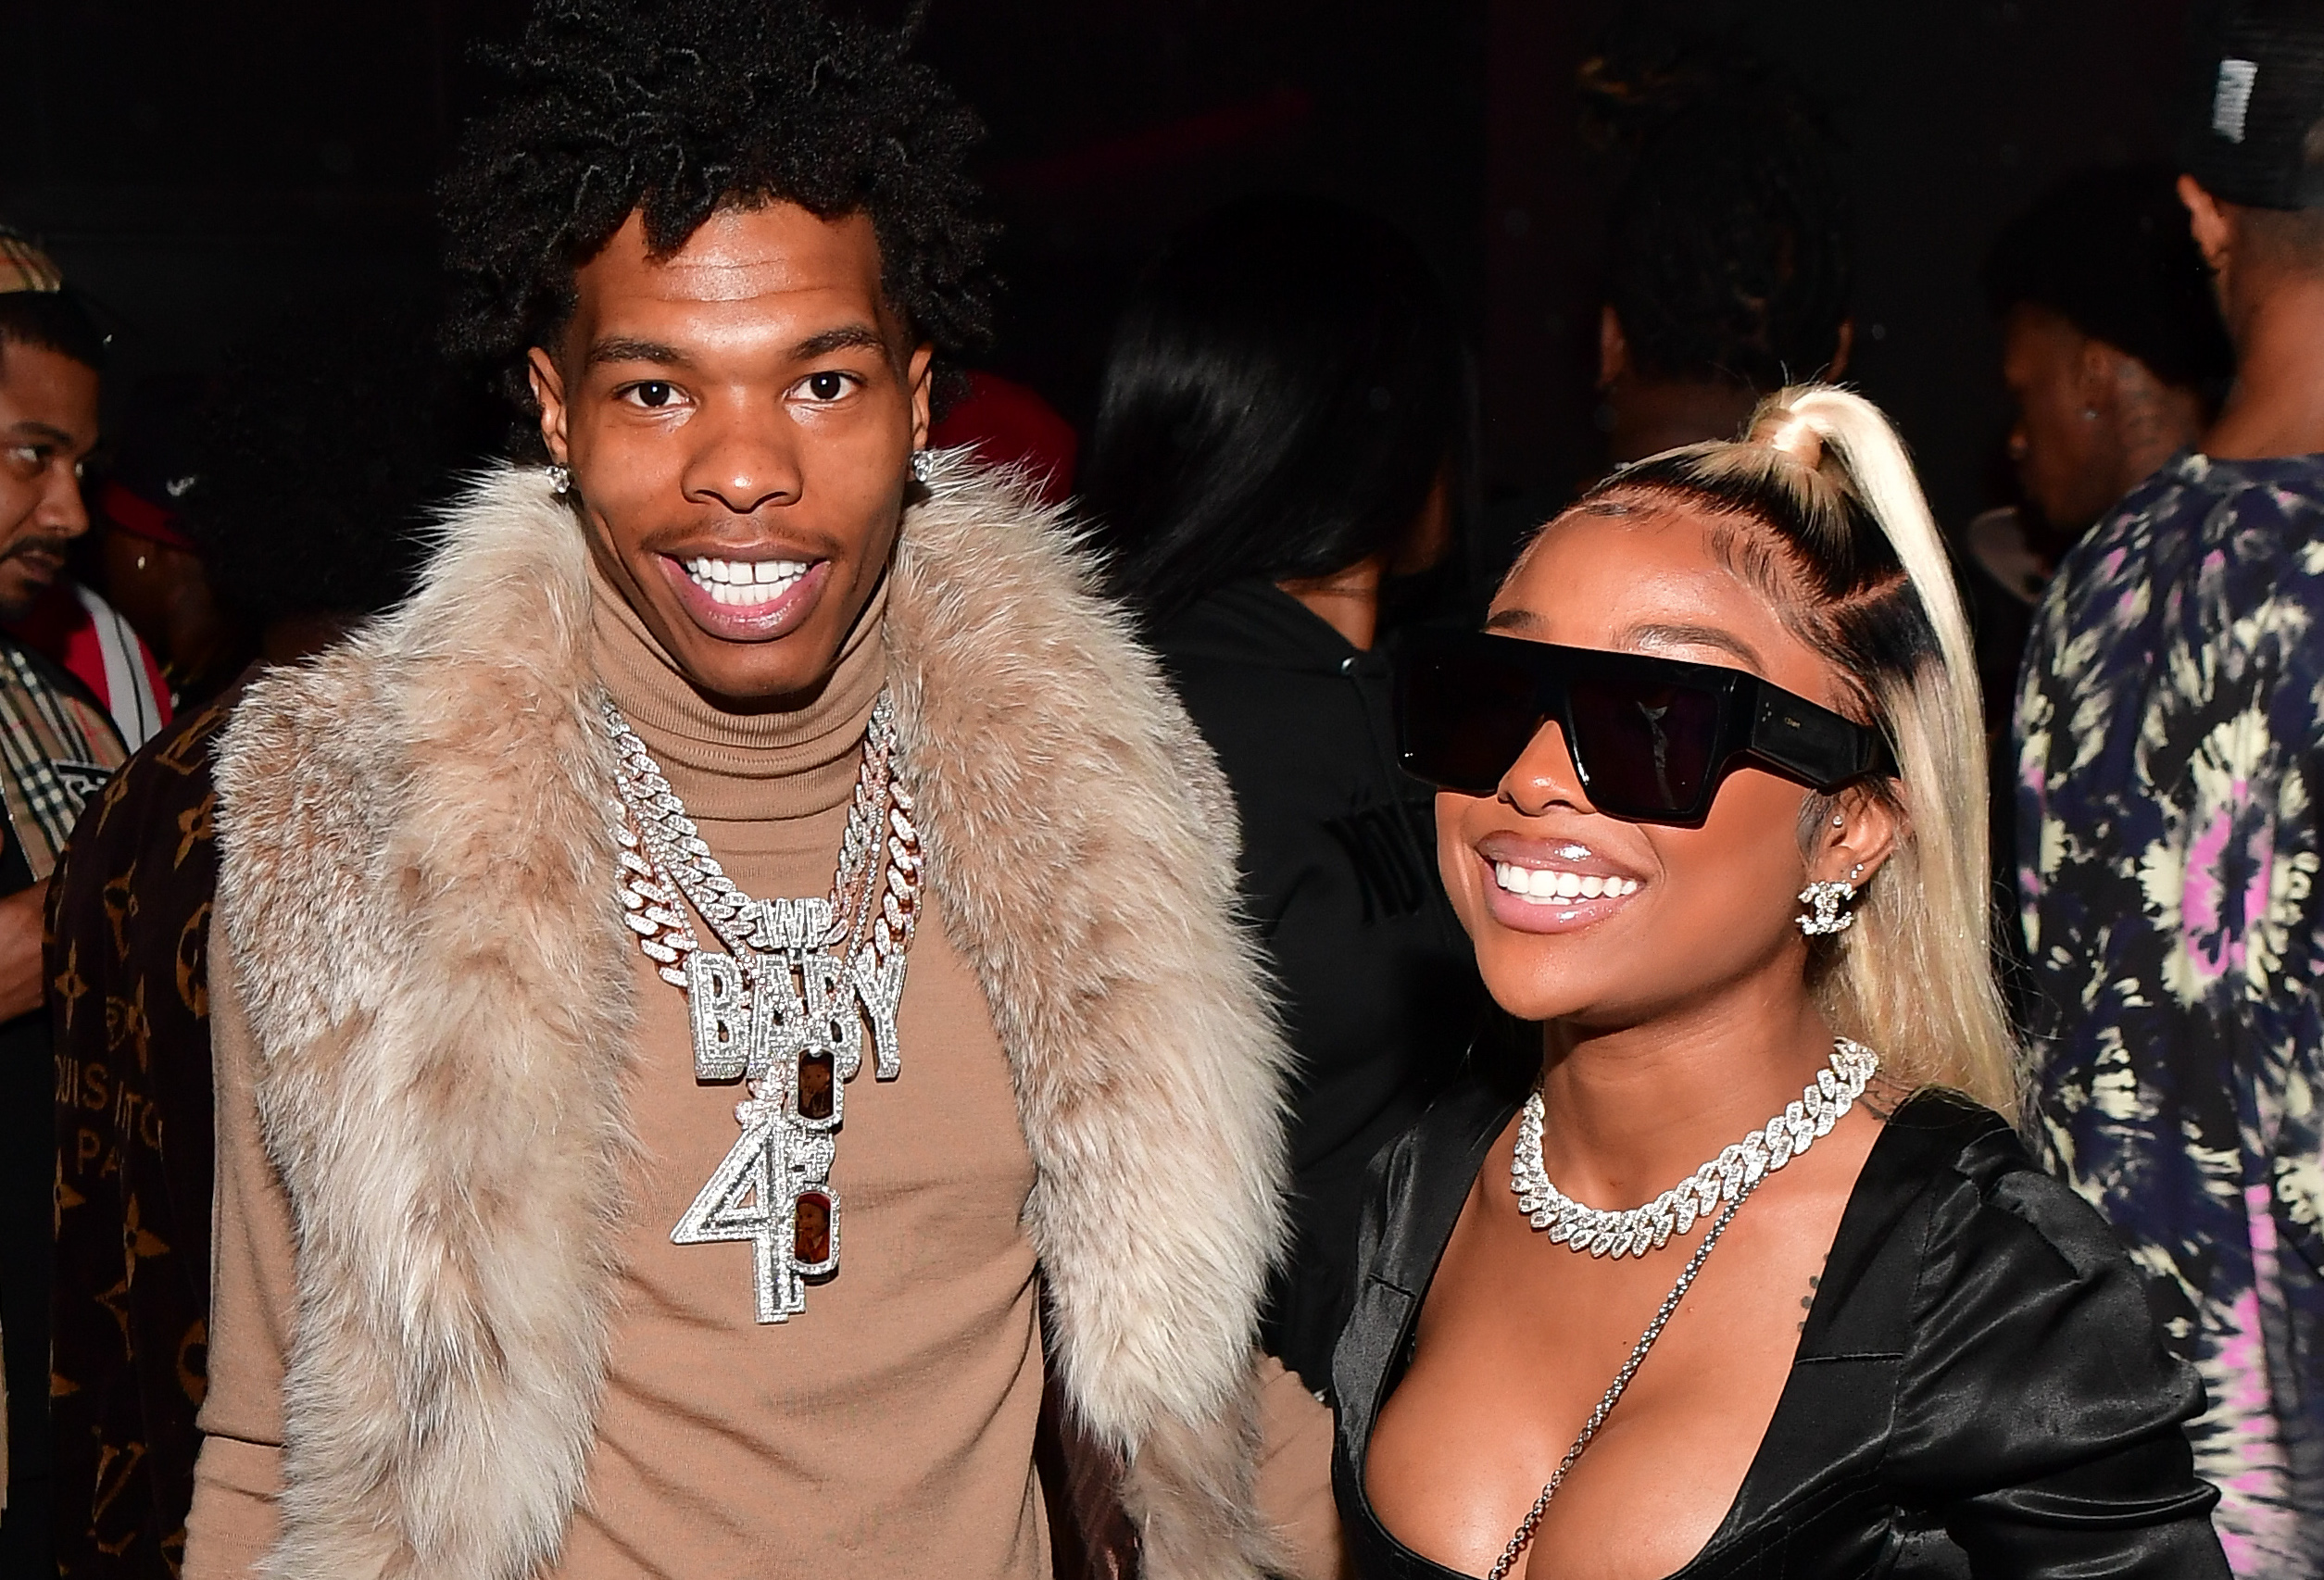 Take A Look Inside Lil Baby’s Iced Out Birthday Extravaganza